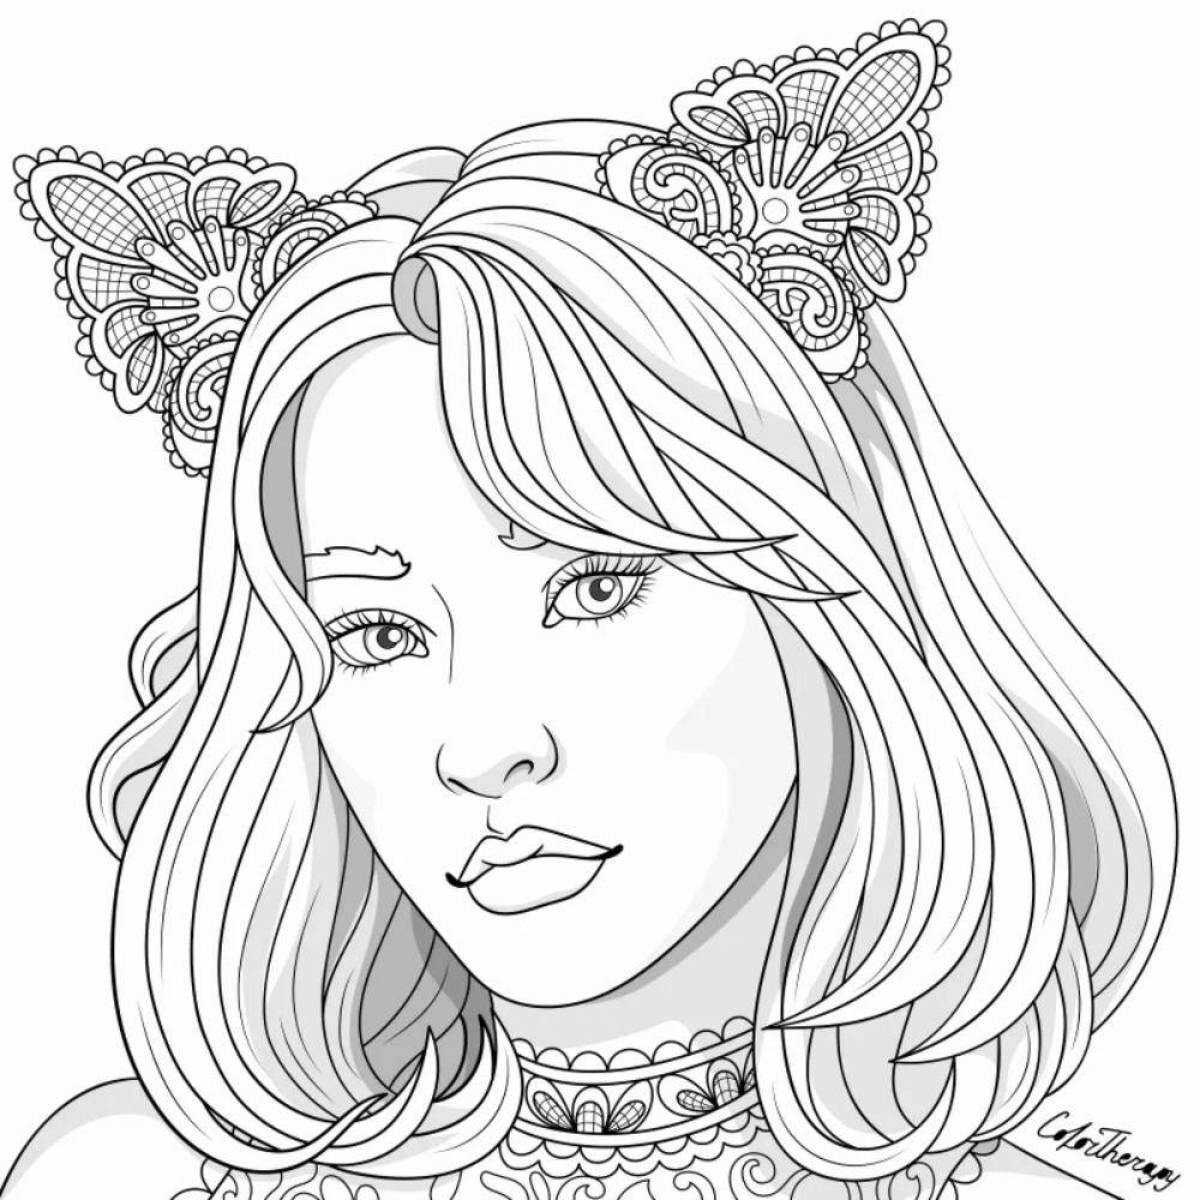 Exquisite coloring book for girls 15